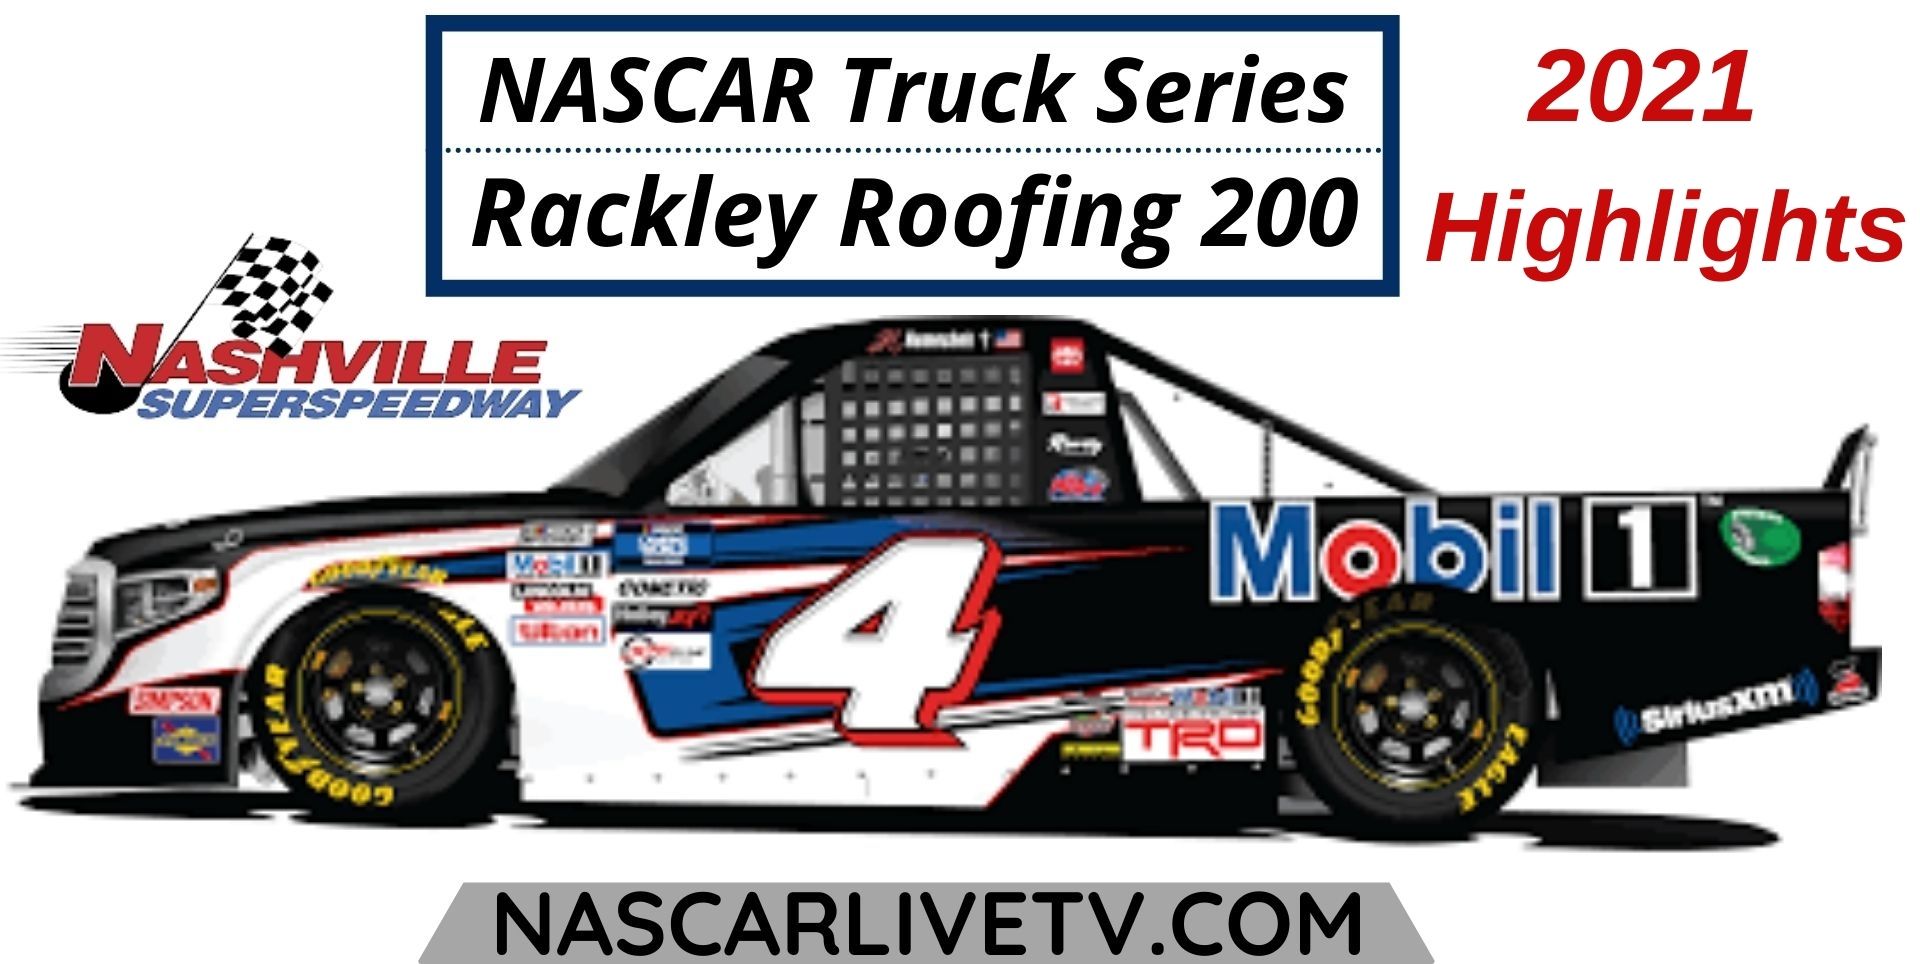 Rackley Roofing 200 Highlights NASCAR Truck Series 2021